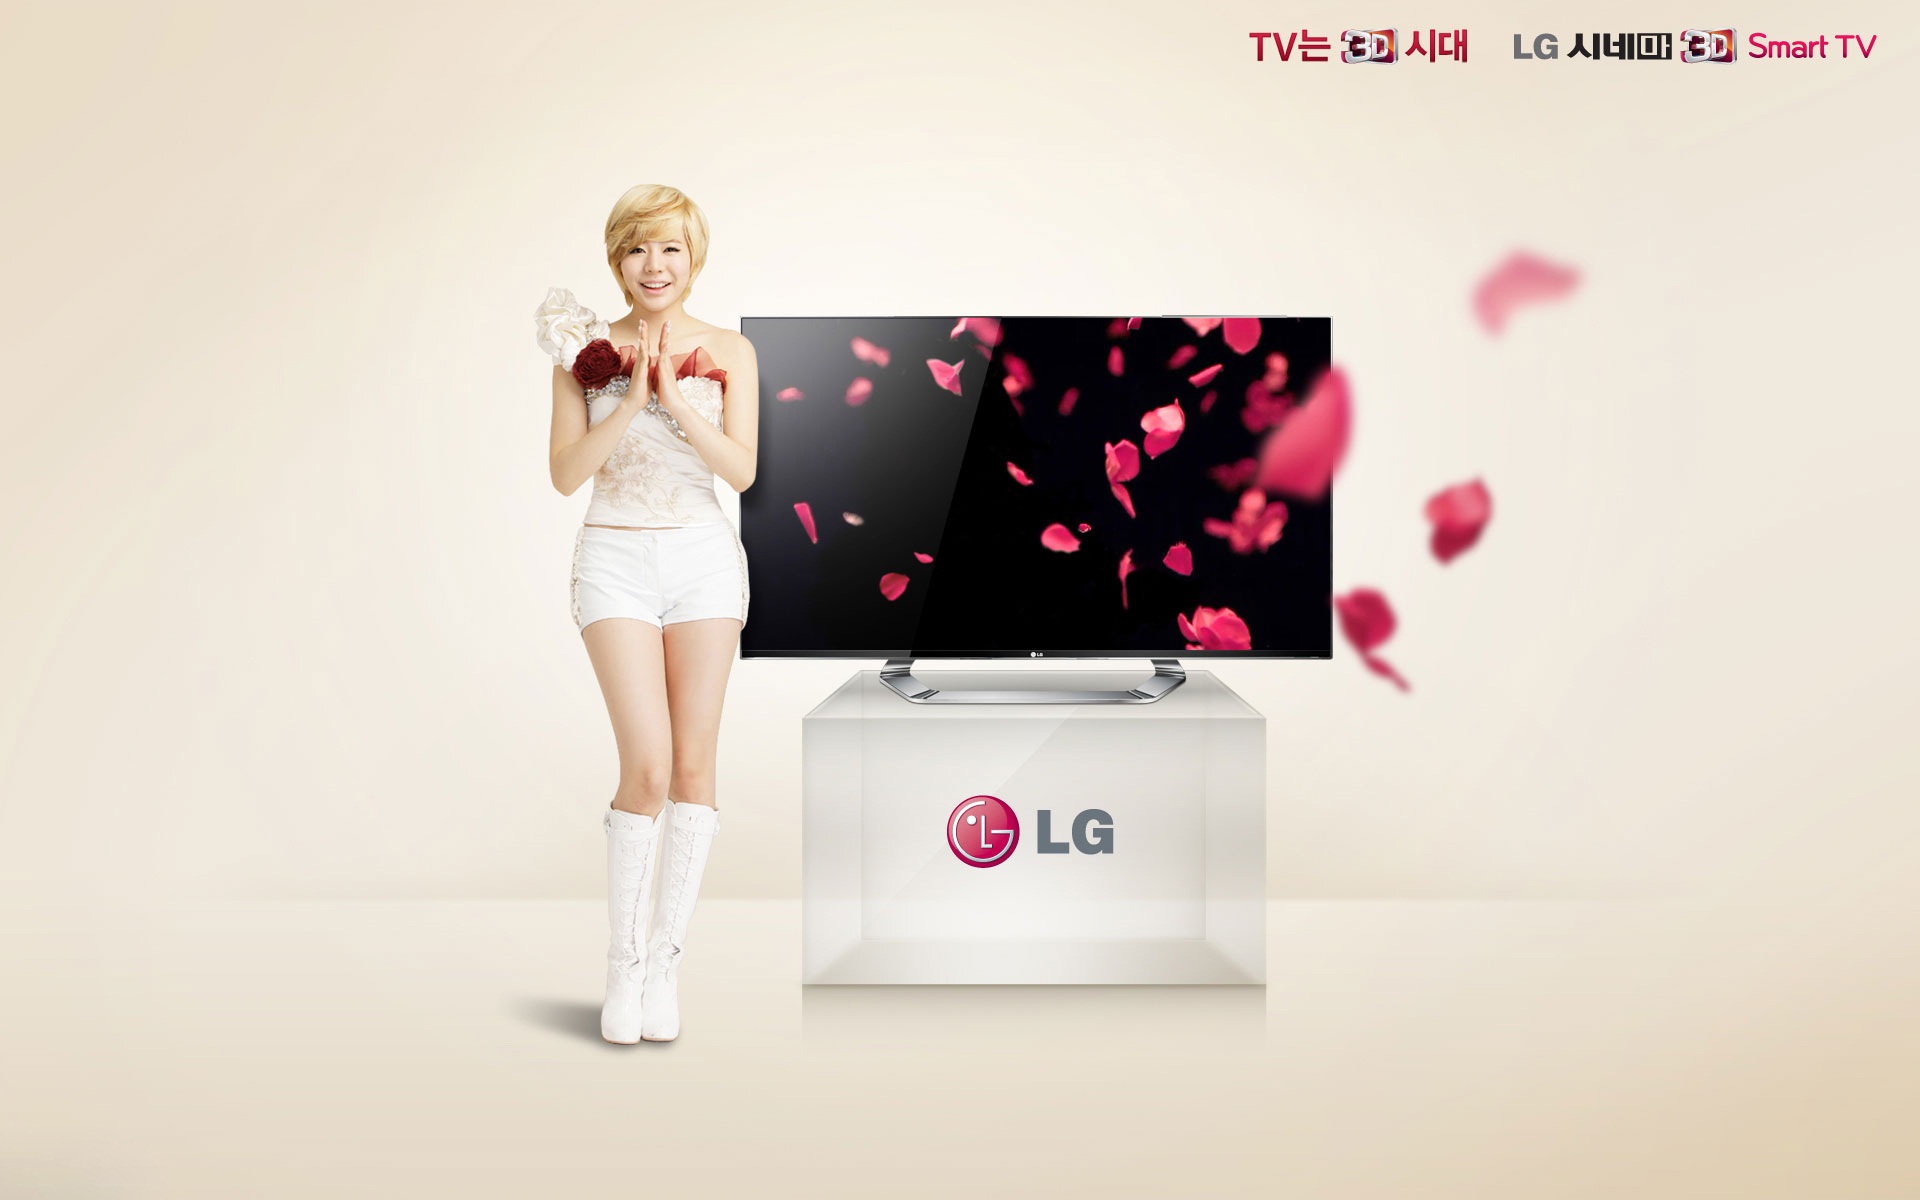 Girls Generation ACE and LG endorsements ads HD wallpapers #19 - 1920x1200